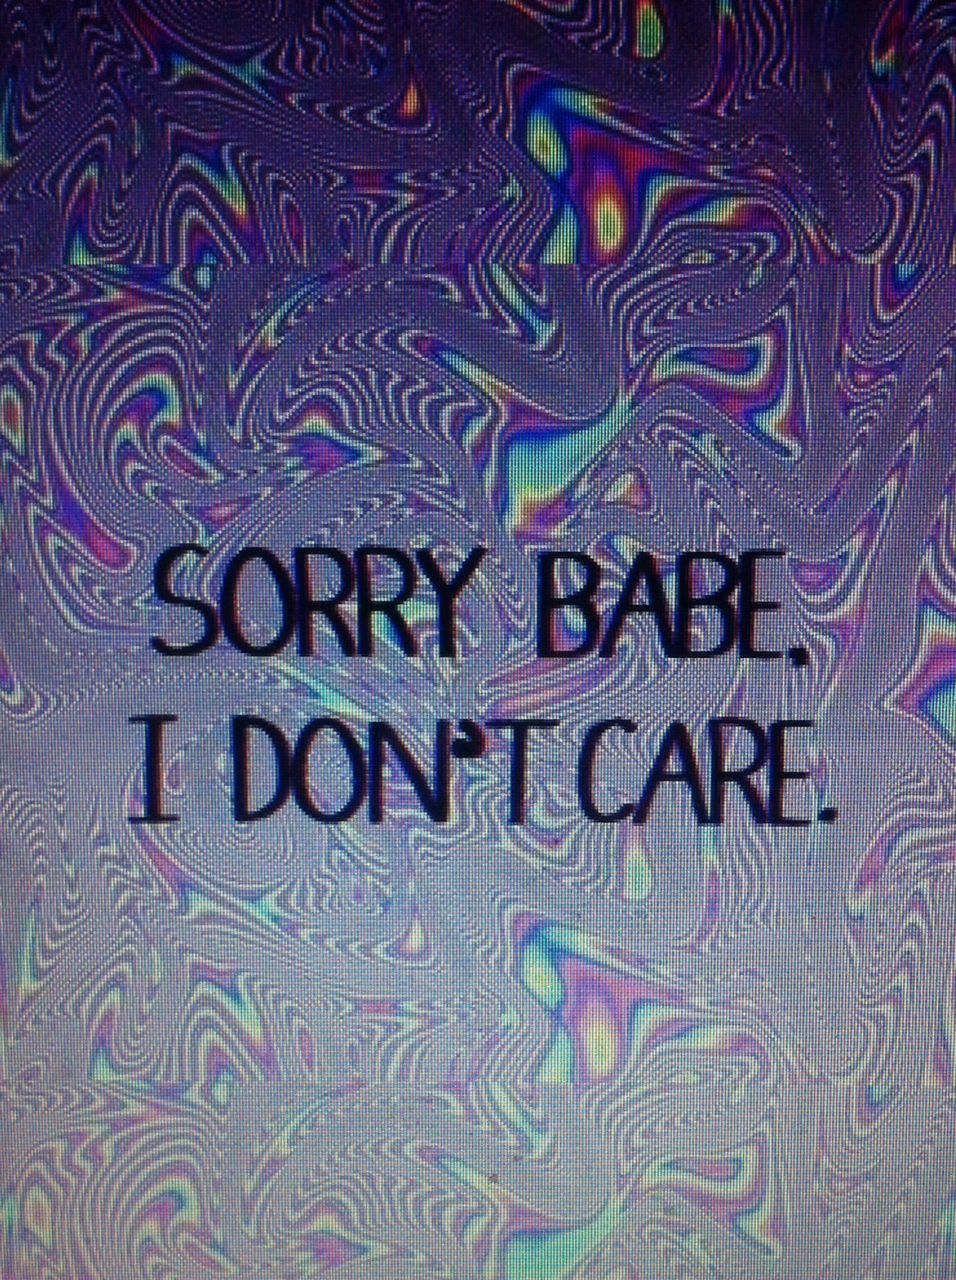 I Dont Care Quotes Wallpapers  Wallpaper Cave